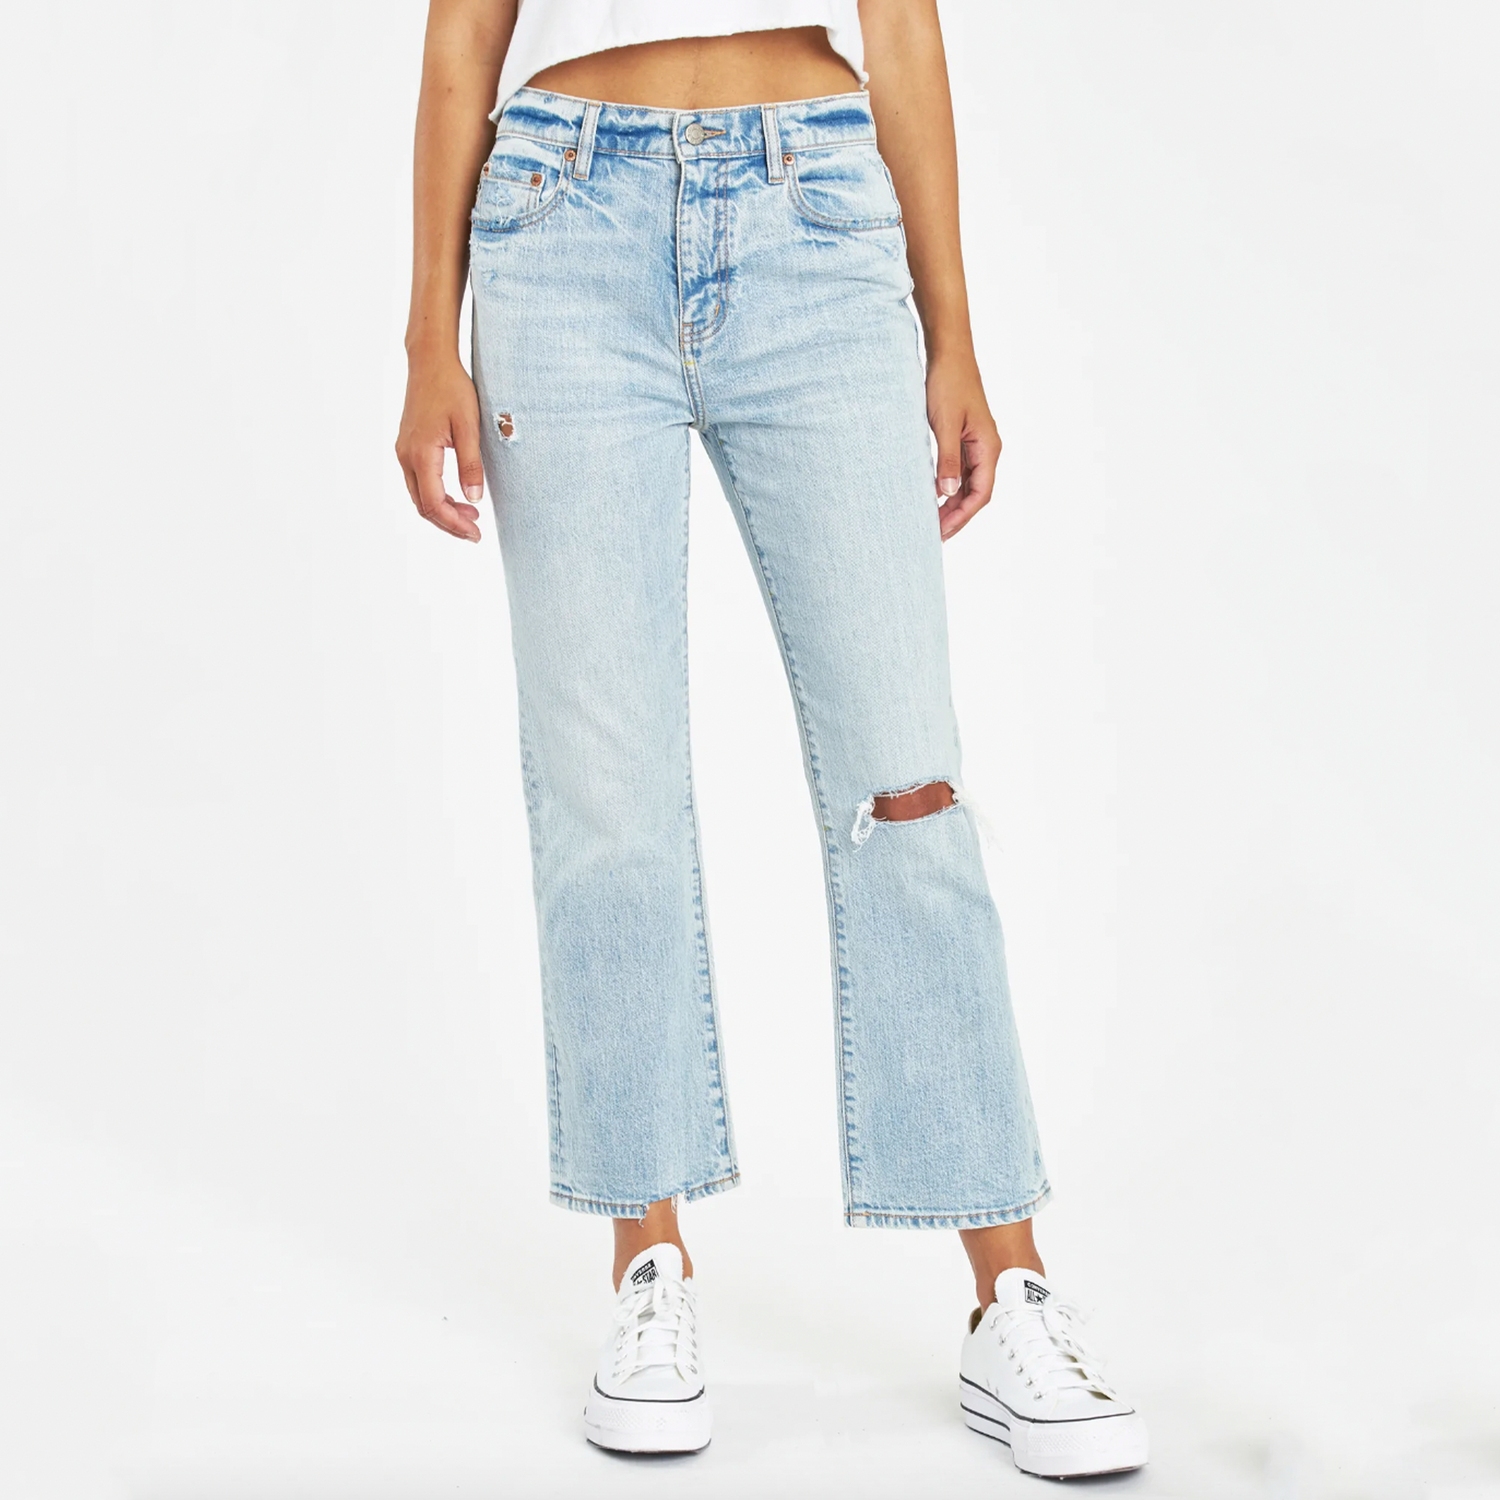 Daze Shy Girl High Rise Crop Flare Jean. The Shy Girl Jean in High Key is made to look like an authentic vintage bottom. It's mostly rigid but yields to your body in all the right ways where you need it to